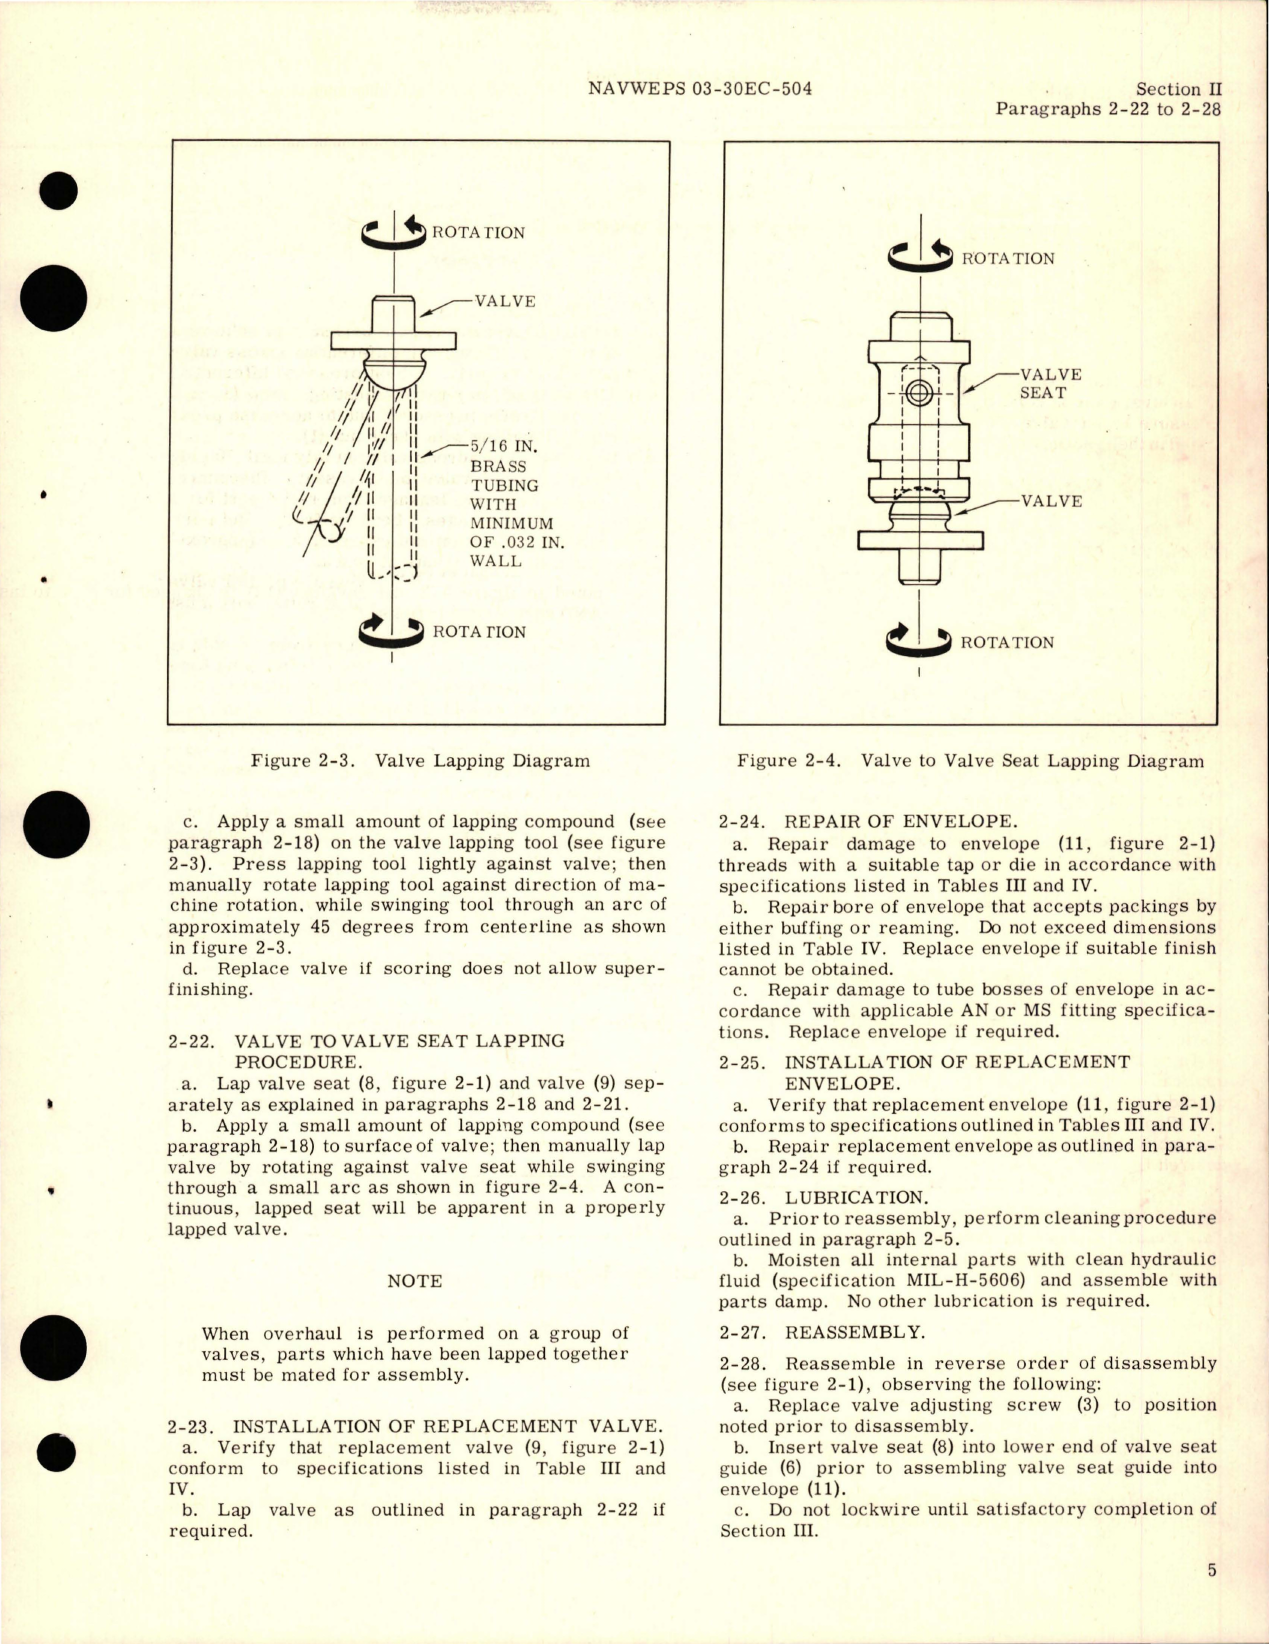 Sample page 9 from AirCorps Library document: Overhaul Instructions for Hydraulic Pressure Relief Valves - Parts AB-8-01, AB-8-02, AB-8-02A, AB-8-03, and AB-68-04 